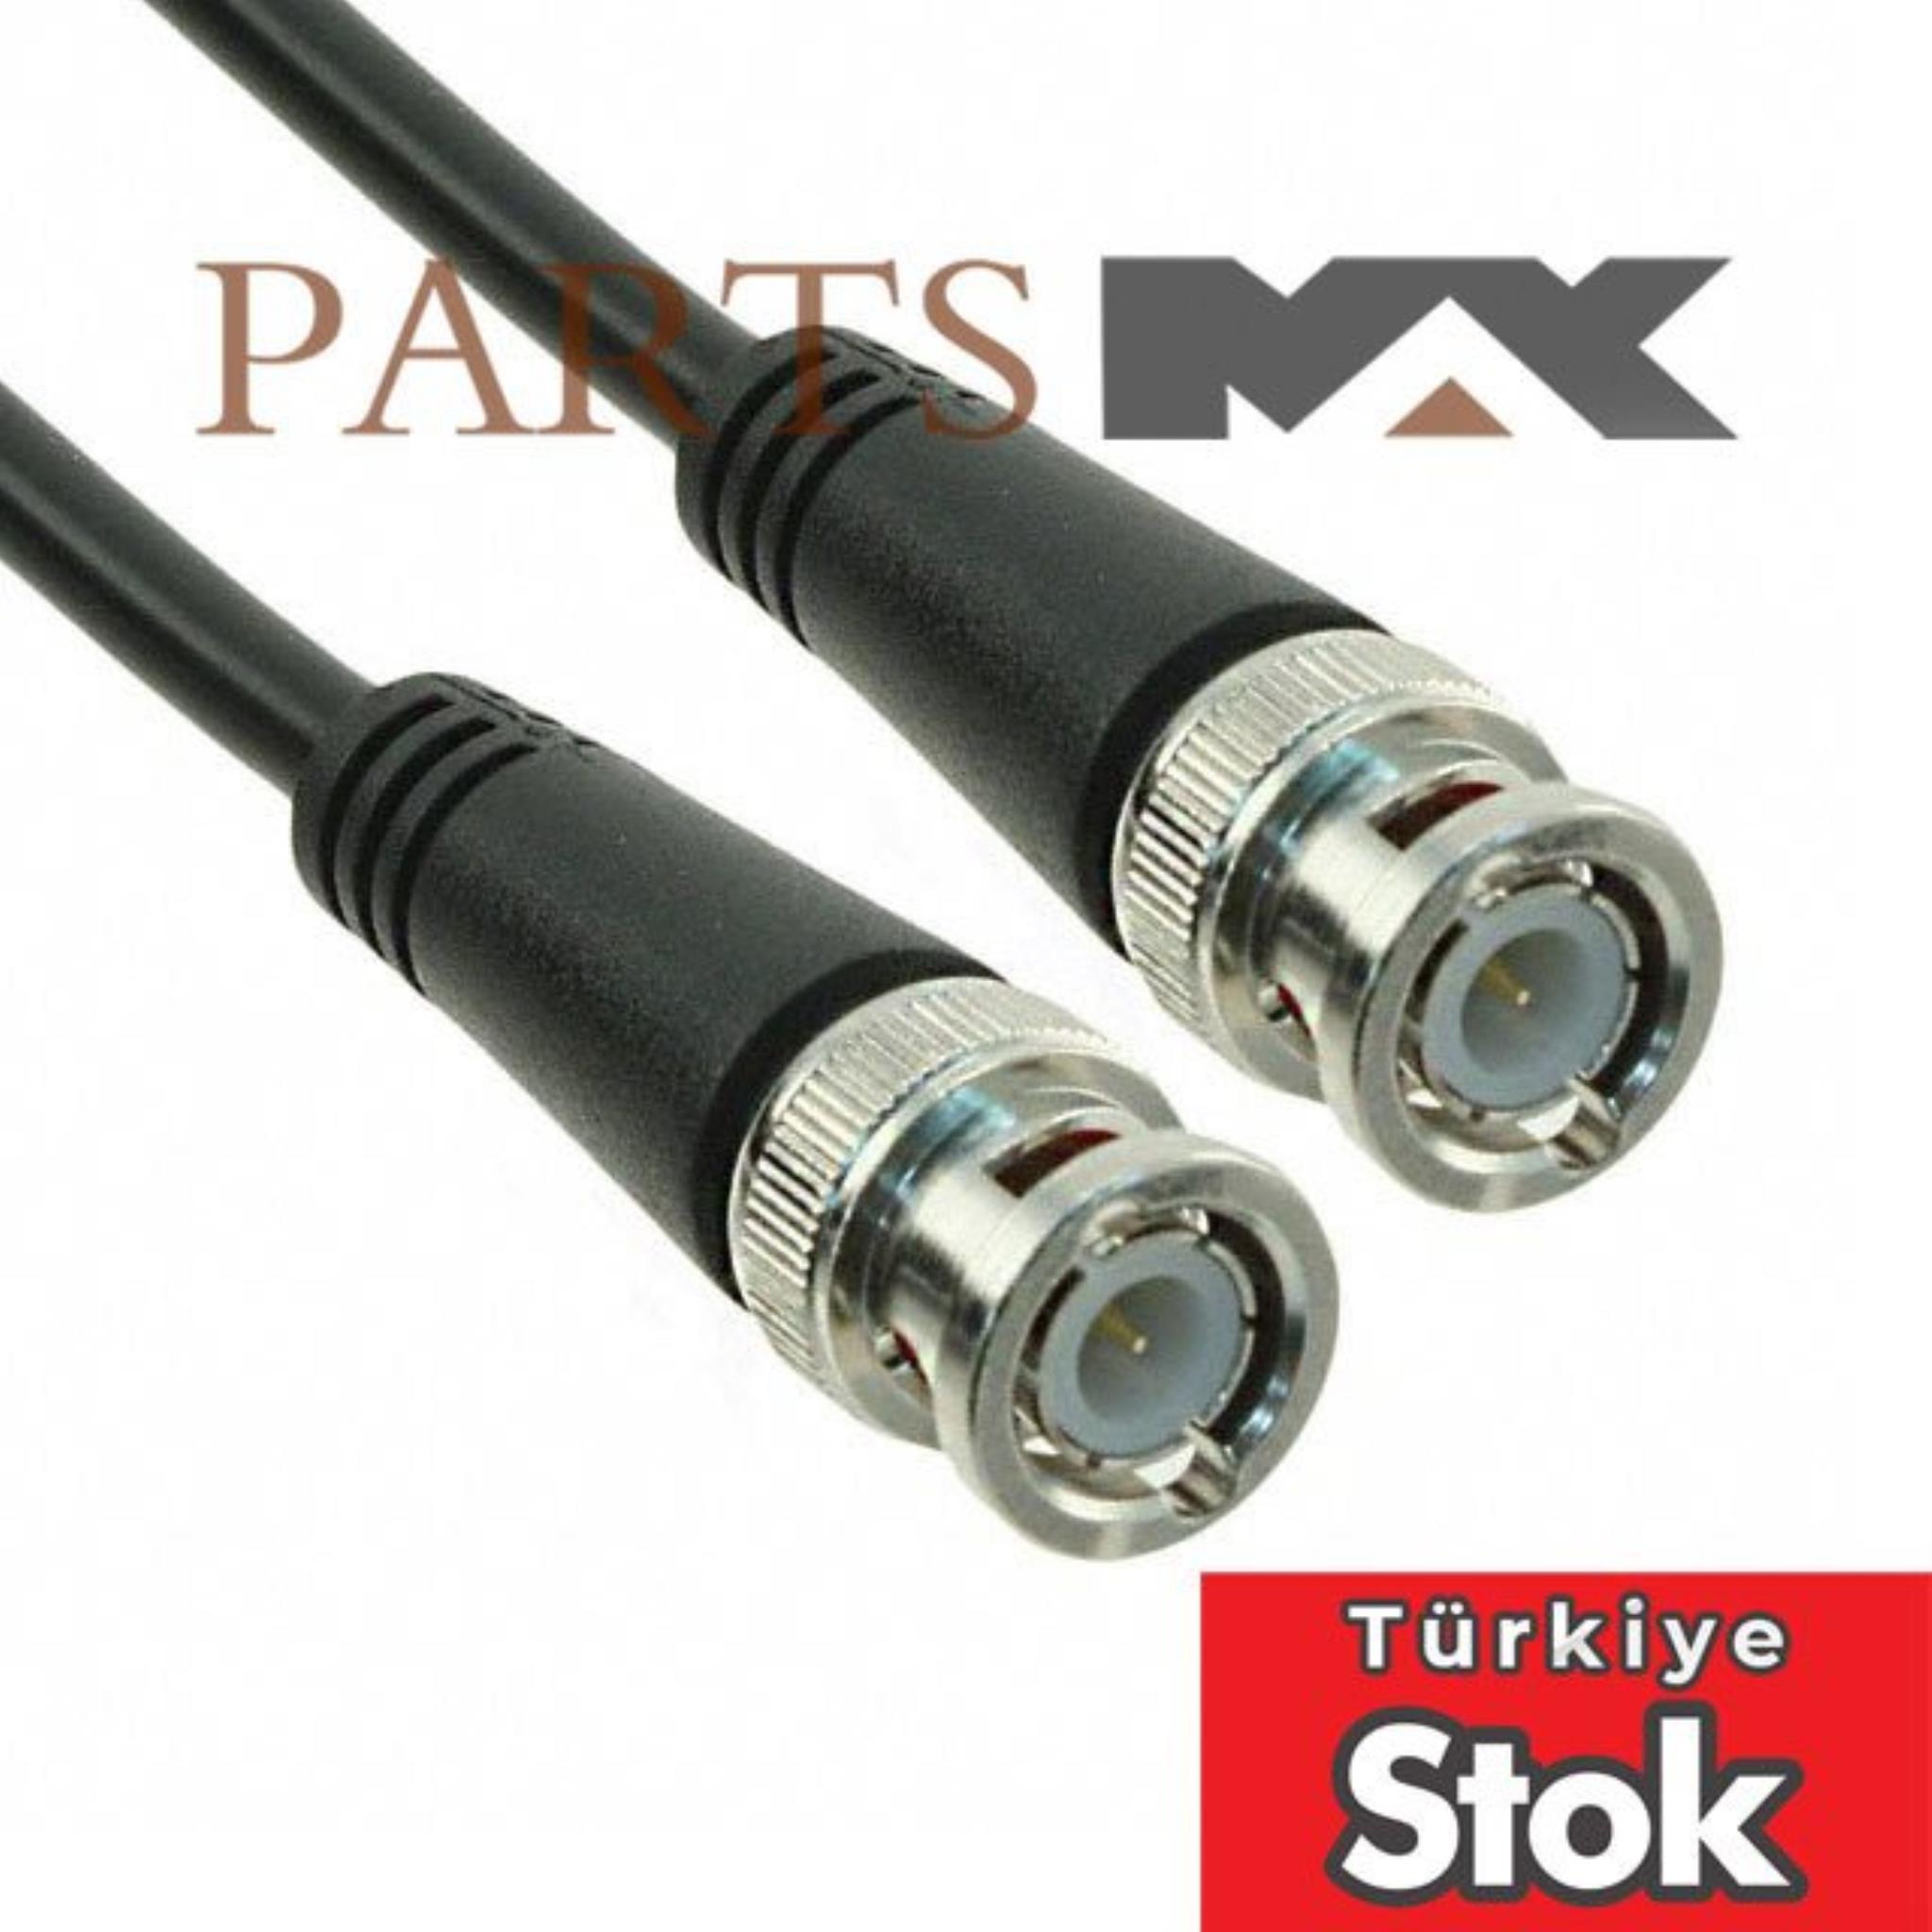 Picture of 58-048-1M TPI (Test Products Int)| Partsmax Türkiye